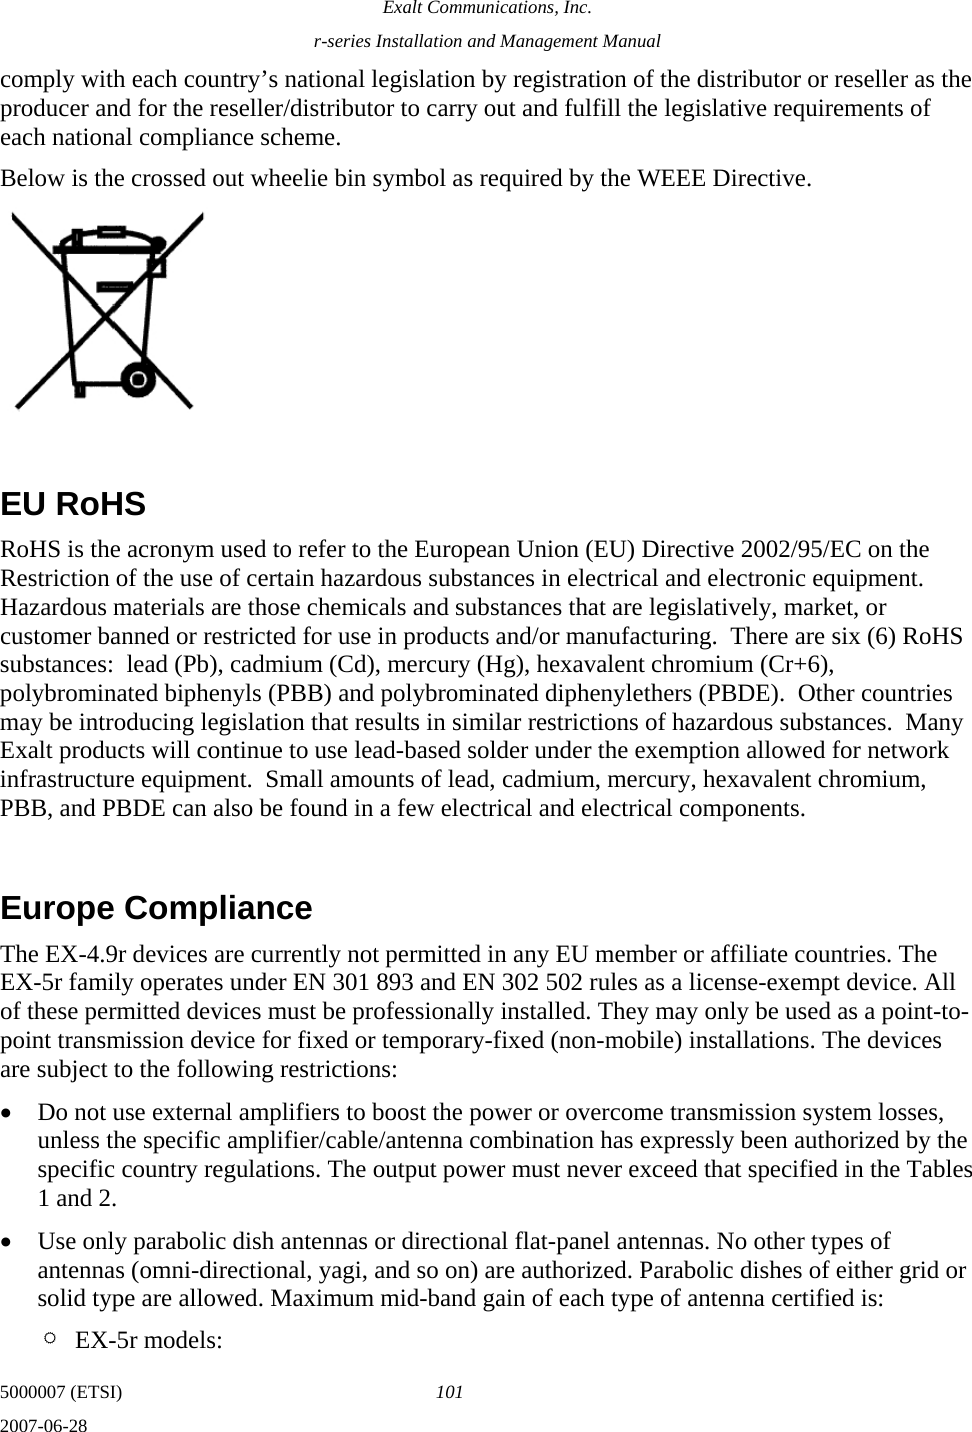 Exalt Communications, Inc. r-series Installation and Management Manual 5000007 (ETSI)  101 2007-06-28  comply with each country’s national legislation by registration of the distributor or reseller as the producer and for the reseller/distributor to carry out and fulfill the legislative requirements of each national compliance scheme. Below is the crossed out wheelie bin symbol as required by the WEEE Directive.   EU RoHS RoHS is the acronym used to refer to the European Union (EU) Directive 2002/95/EC on the Restriction of the use of certain hazardous substances in electrical and electronic equipment.  Hazardous materials are those chemicals and substances that are legislatively, market, or customer banned or restricted for use in products and/or manufacturing.  There are six (6) RoHS substances:  lead (Pb), cadmium (Cd), mercury (Hg), hexavalent chromium (Cr+6), polybrominated biphenyls (PBB) and polybrominated diphenylethers (PBDE).  Other countries may be introducing legislation that results in similar restrictions of hazardous substances.  Many Exalt products will continue to use lead-based solder under the exemption allowed for network infrastructure equipment.  Small amounts of lead, cadmium, mercury, hexavalent chromium, PBB, and PBDE can also be found in a few electrical and electrical components.    Europe Compliance The EX-4.9r devices are currently not permitted in any EU member or affiliate countries. The EX-5r family operates under EN 301 893 and EN 302 502 rules as a license-exempt device. All of these permitted devices must be professionally installed. They may only be used as a point-to-point transmission device for fixed or temporary-fixed (non-mobile) installations. The devices are subject to the following restrictions: • Do not use external amplifiers to boost the power or overcome transmission system losses, unless the specific amplifier/cable/antenna combination has expressly been authorized by the specific country regulations. The output power must never exceed that specified in the Tables 1 and 2.   • Use only parabolic dish antennas or directional flat-panel antennas. No other types of antennas (omni-directional, yagi, and so on) are authorized. Parabolic dishes of either grid or solid type are allowed. Maximum mid-band gain of each type of antenna certified is: ¶ EX-5r models: 